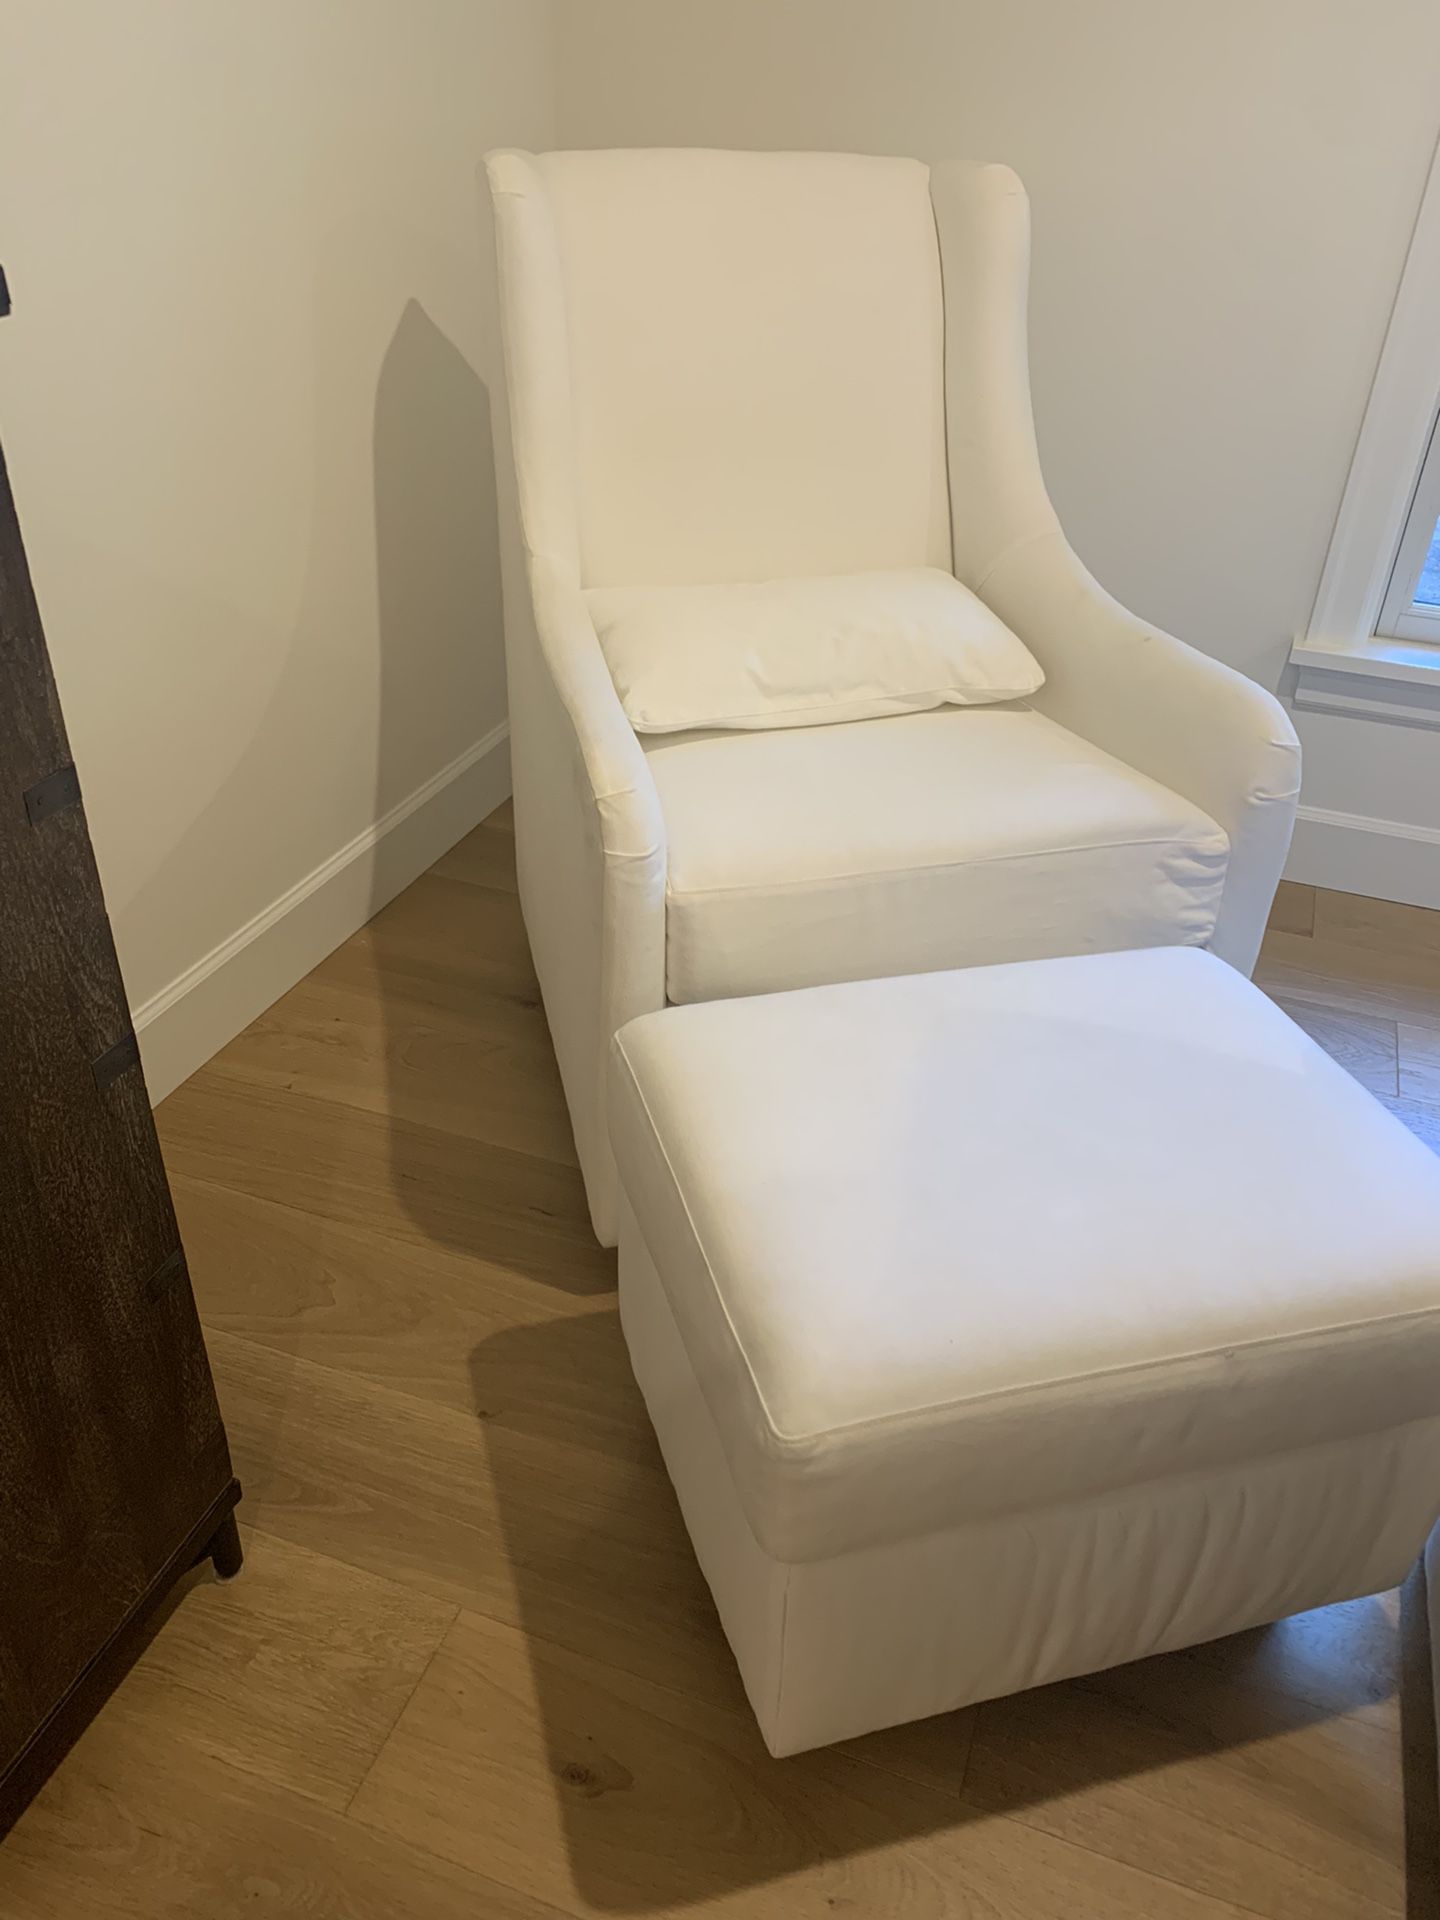 Pottery Barn Glider With Ottoman